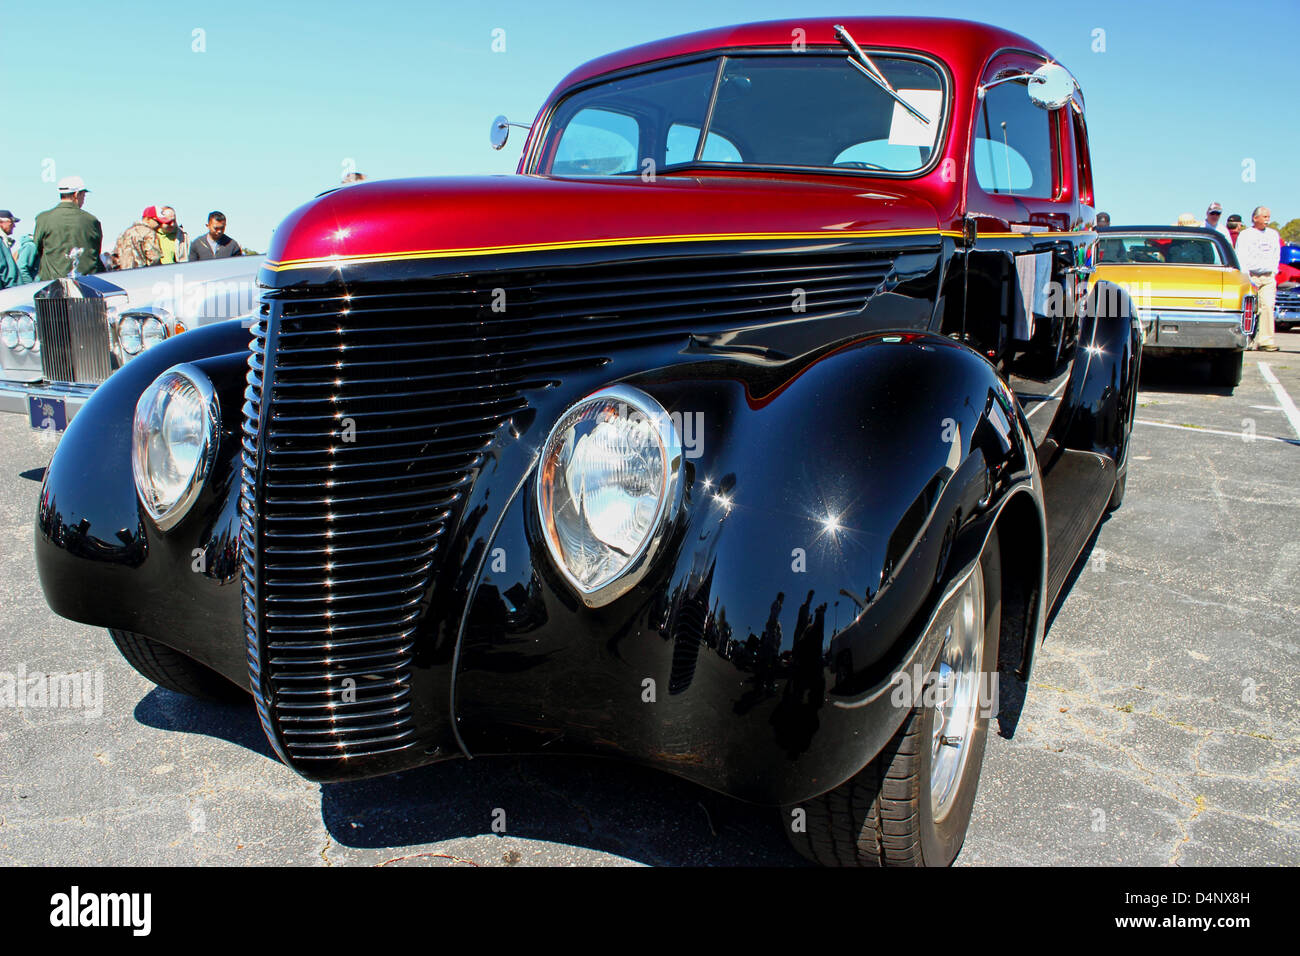 A two tone vintage street rod at the Run to the Sun car show in Myrtle Beach, SC USA on March 15th 2013 Stock Photo